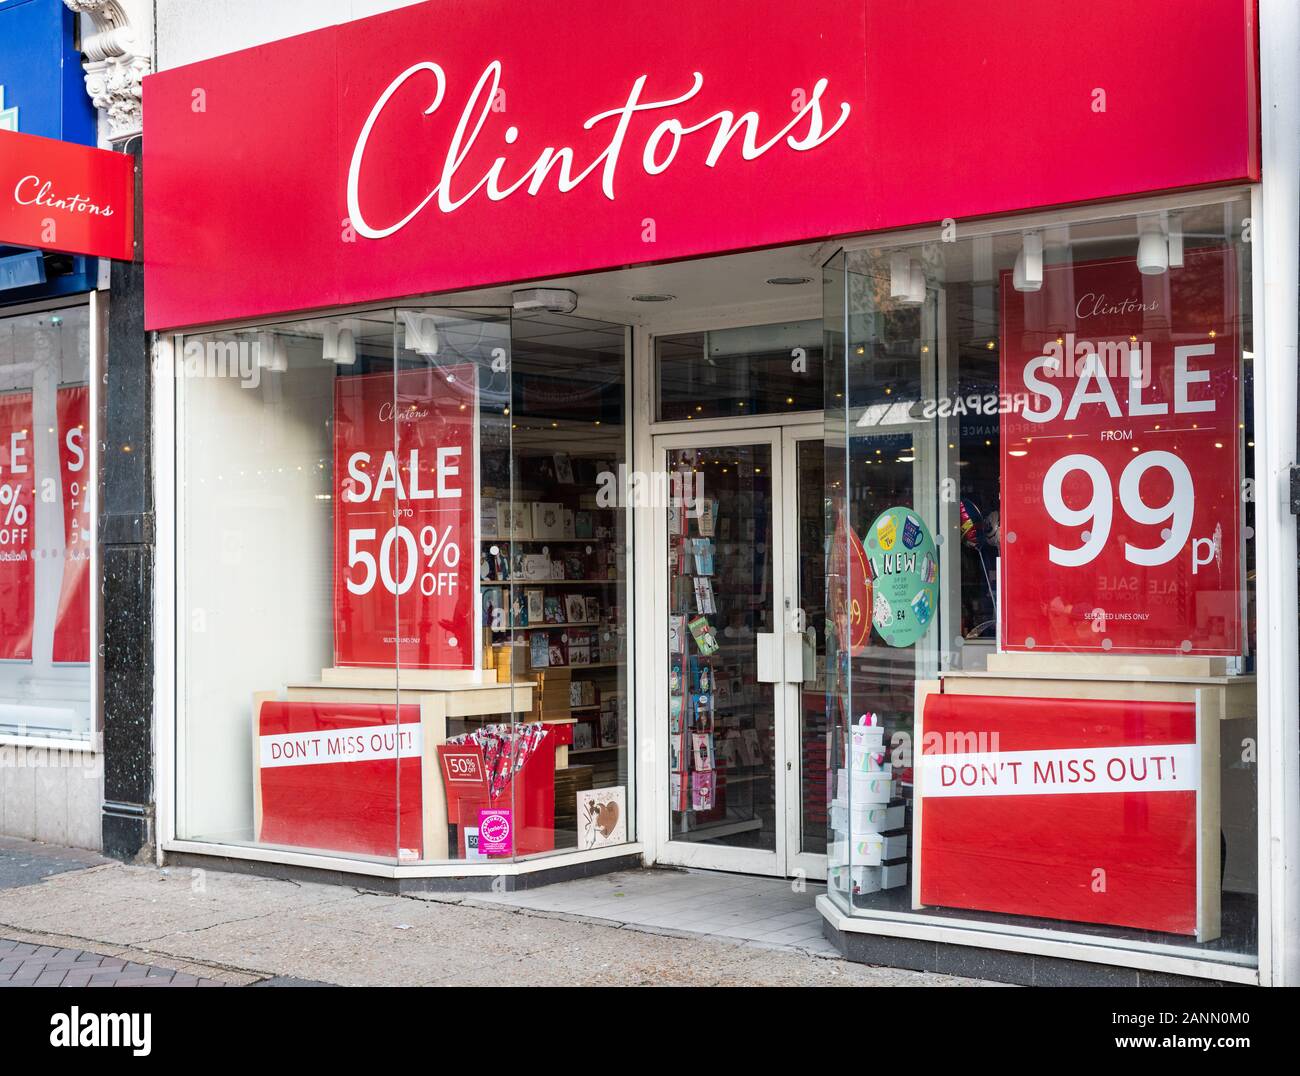 Clintons Cards Winter 2019 / 2020 Sale Stock Photo